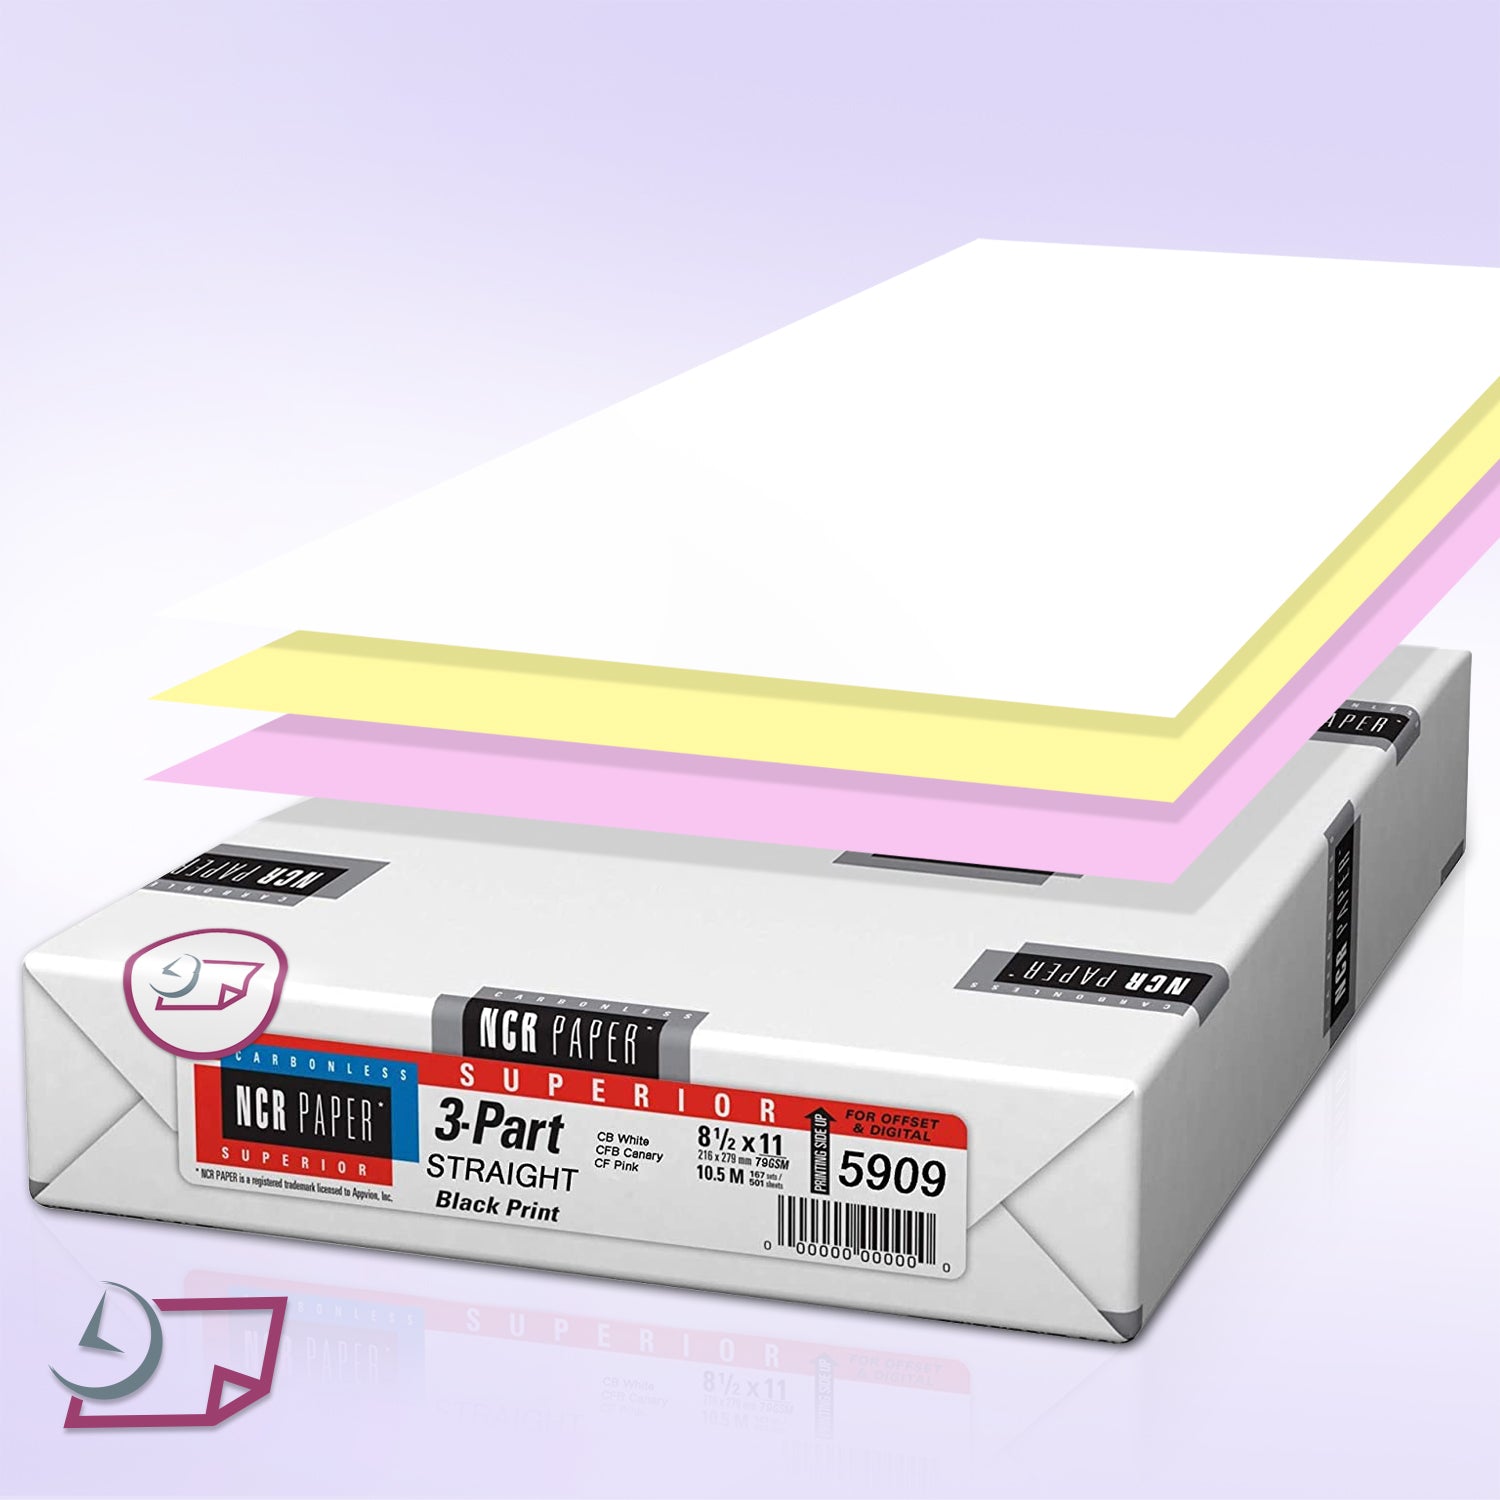 8.5" x 11" 3 Part NCR Superior White/Yellow/Pink Straight Collated Paper, Item #5909